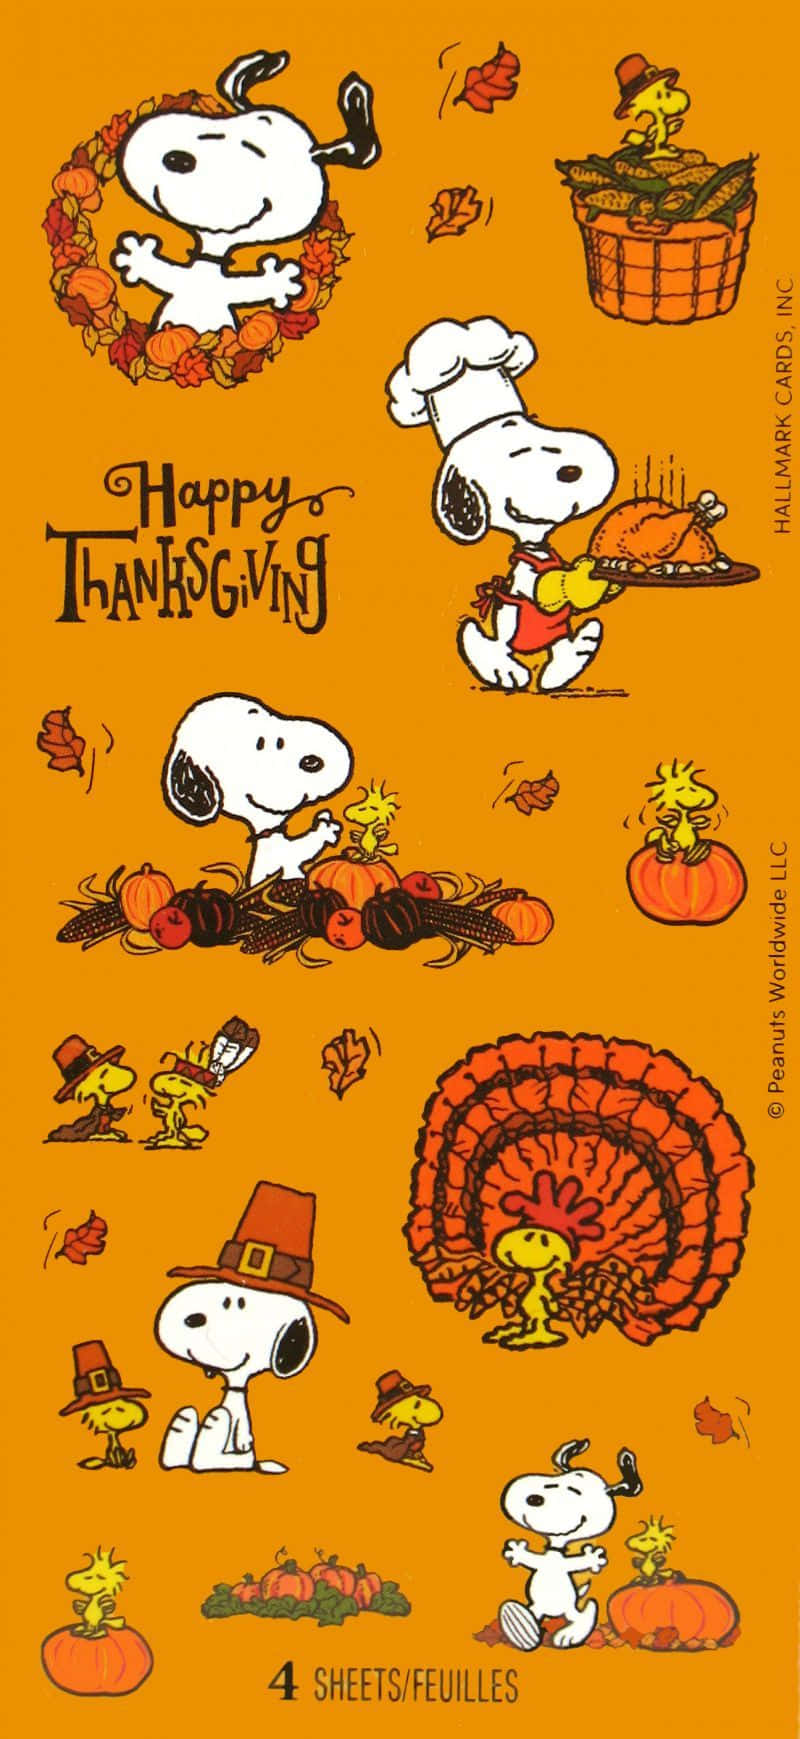 Snoopy Celebrates Thanksgiving with Family and Friends Wallpaper